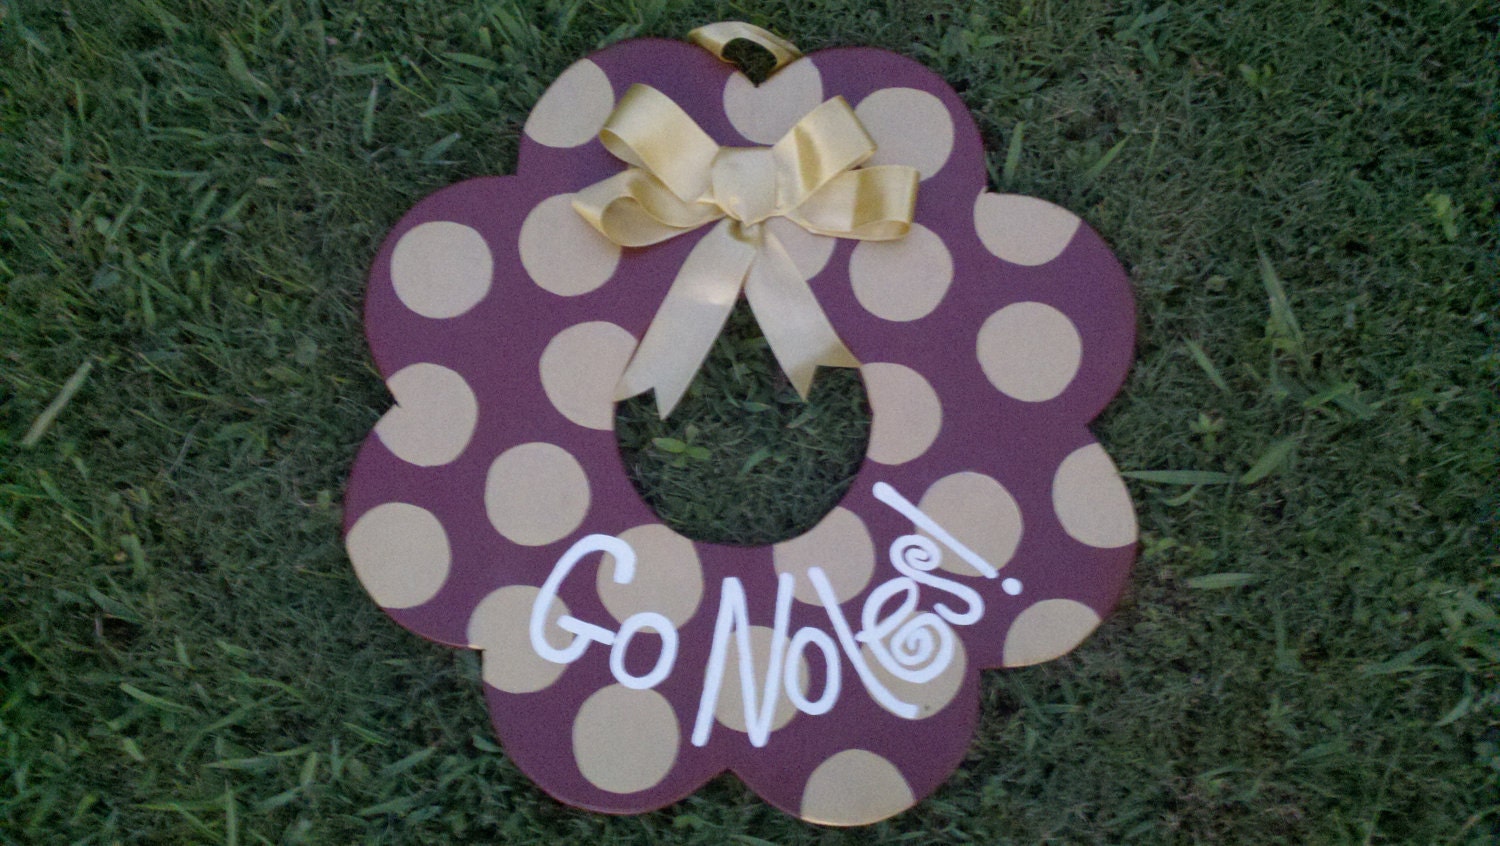 Hand-painted Wooden Team of Your Choice Wreath - Florida State Seminoles Go Noles